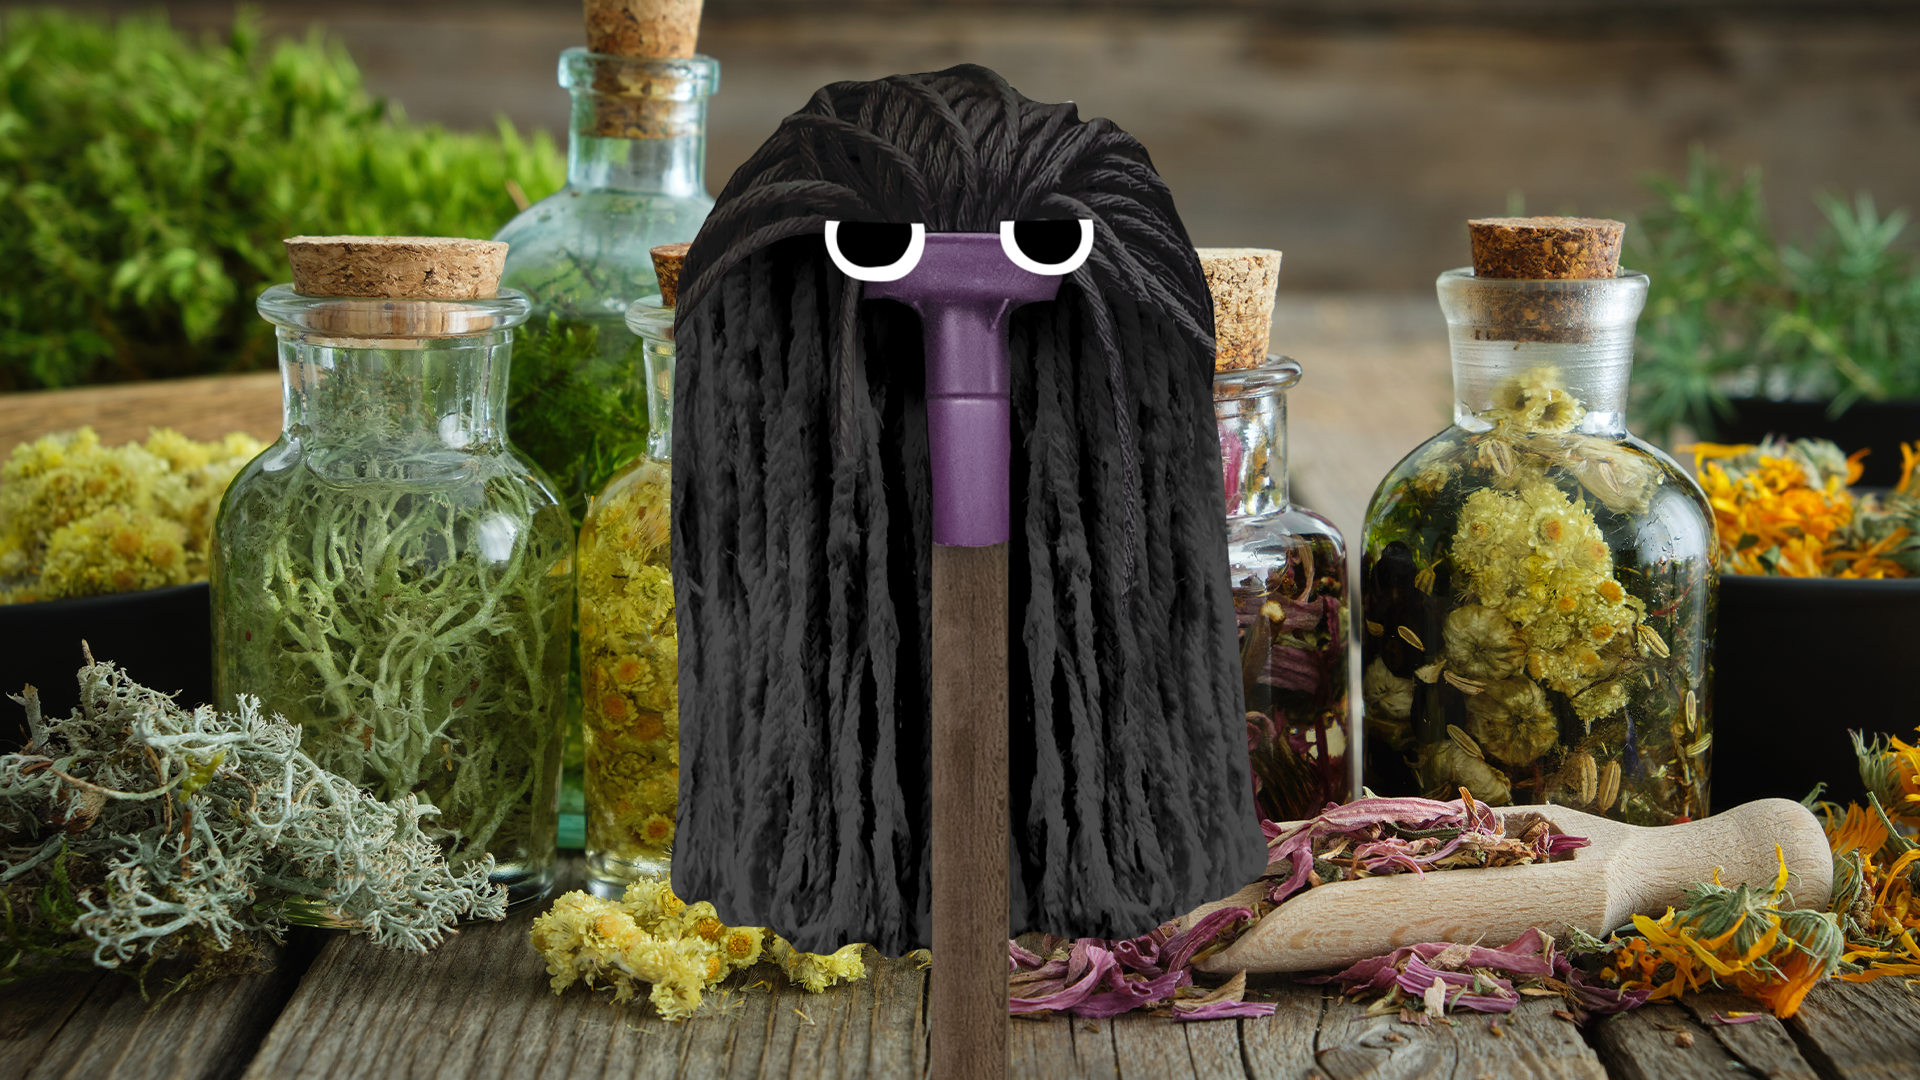 Snape mop and potions 